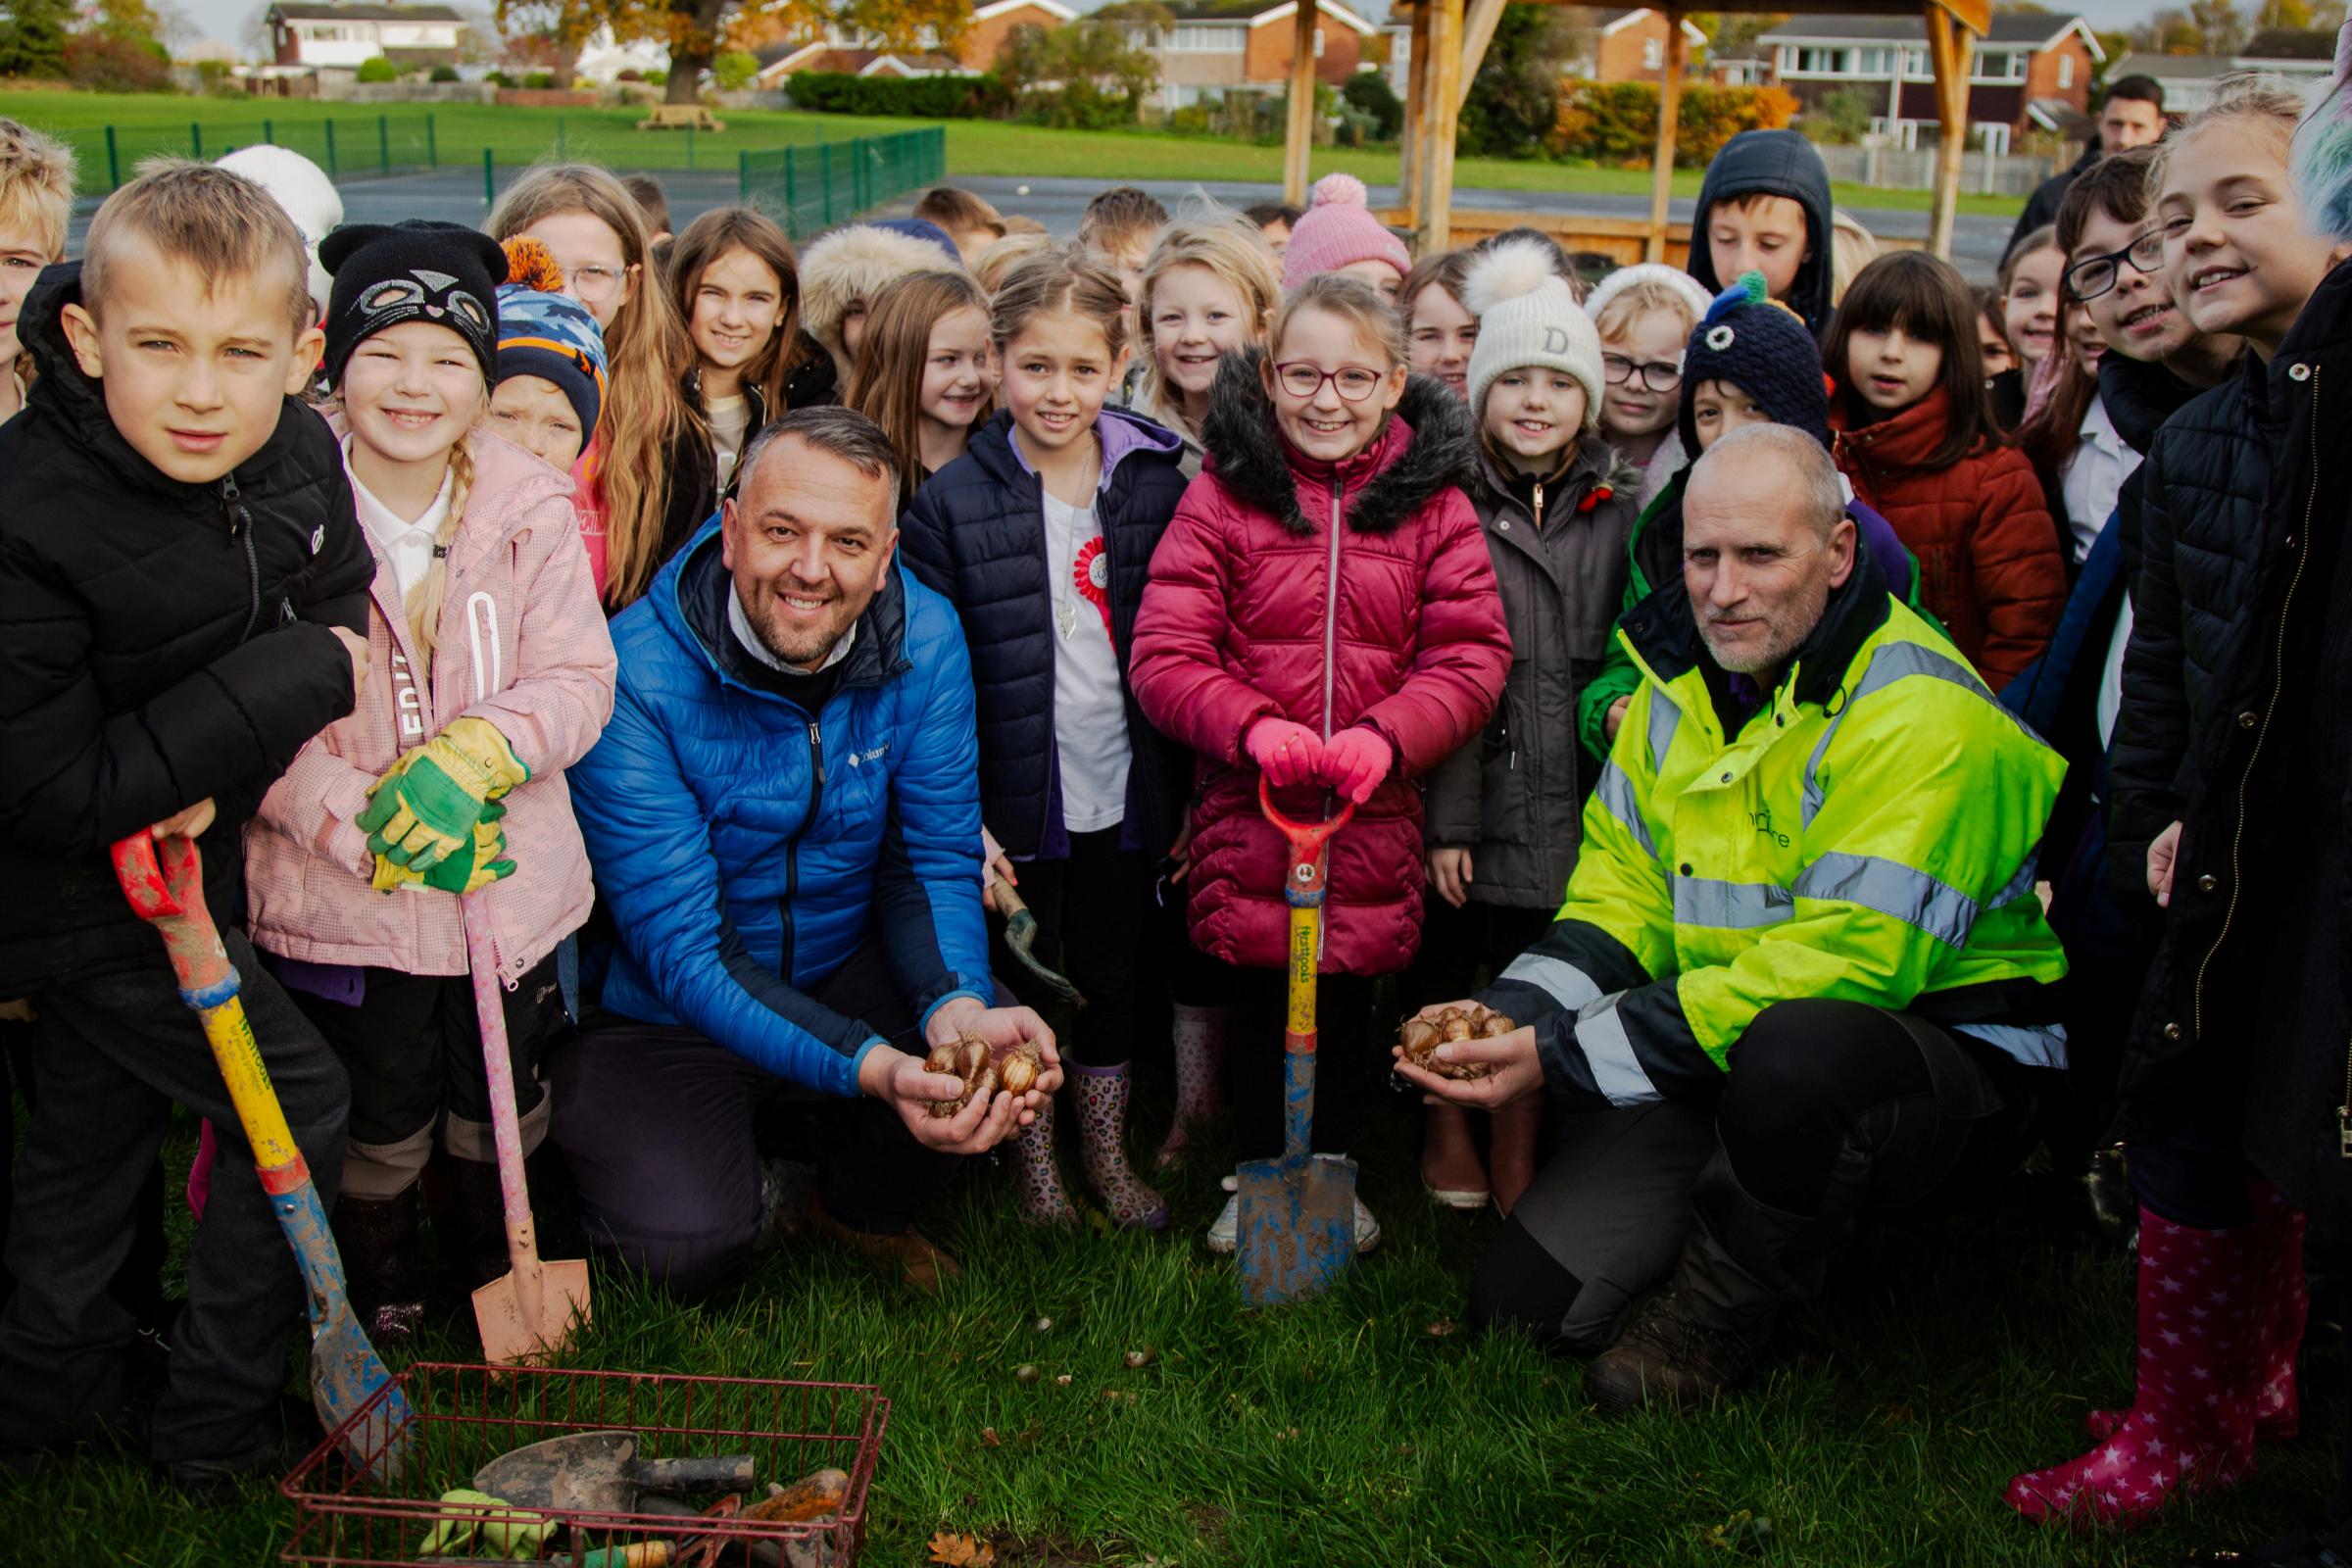 Alan Pruden-Barker, centre manager at Broughton Shopping Park, and Andy Molton, team leader at Nurture, hand-delivered hundreds of bulbs to pupils at Broughton Primary School.